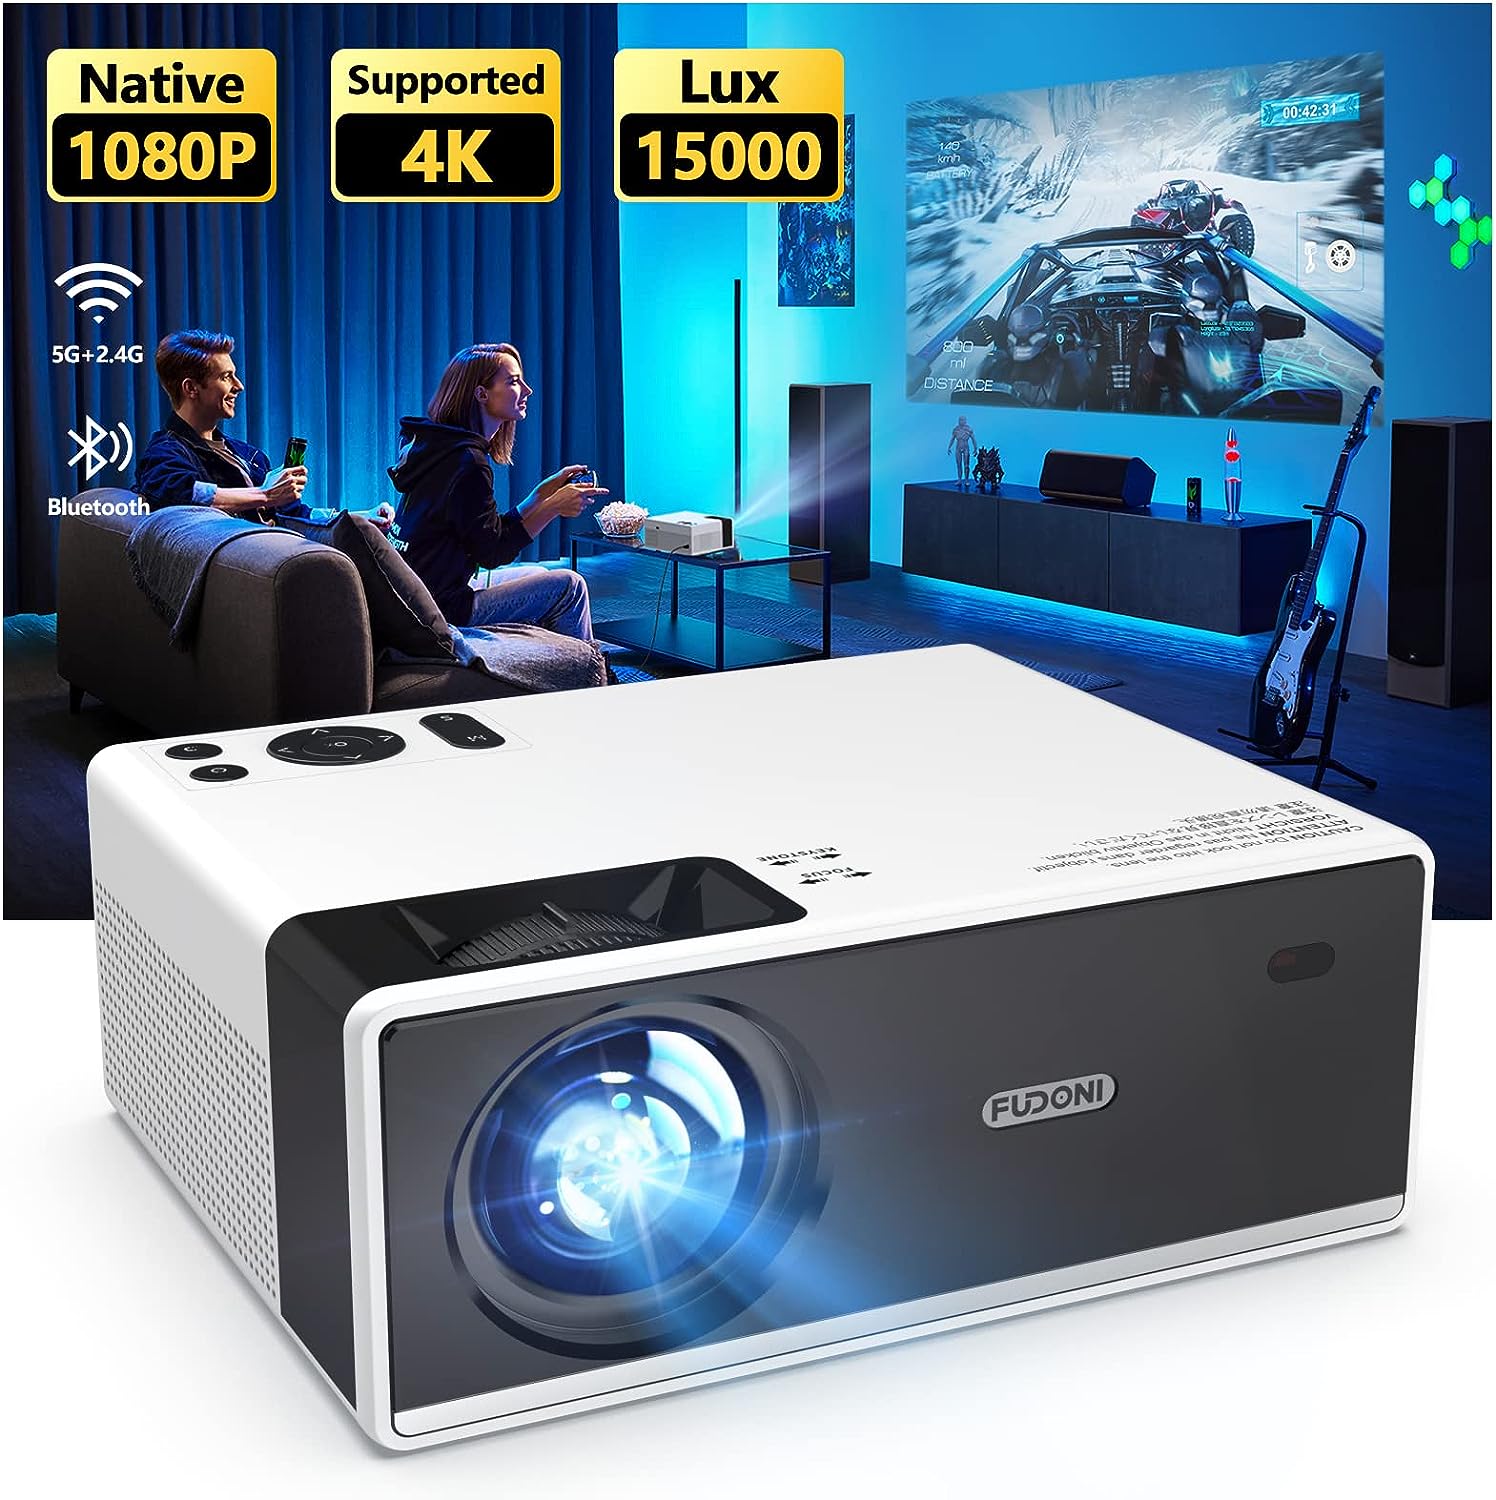 FUDONI Projector with 5G WiFi and Bluetooth, Outdoor [...]